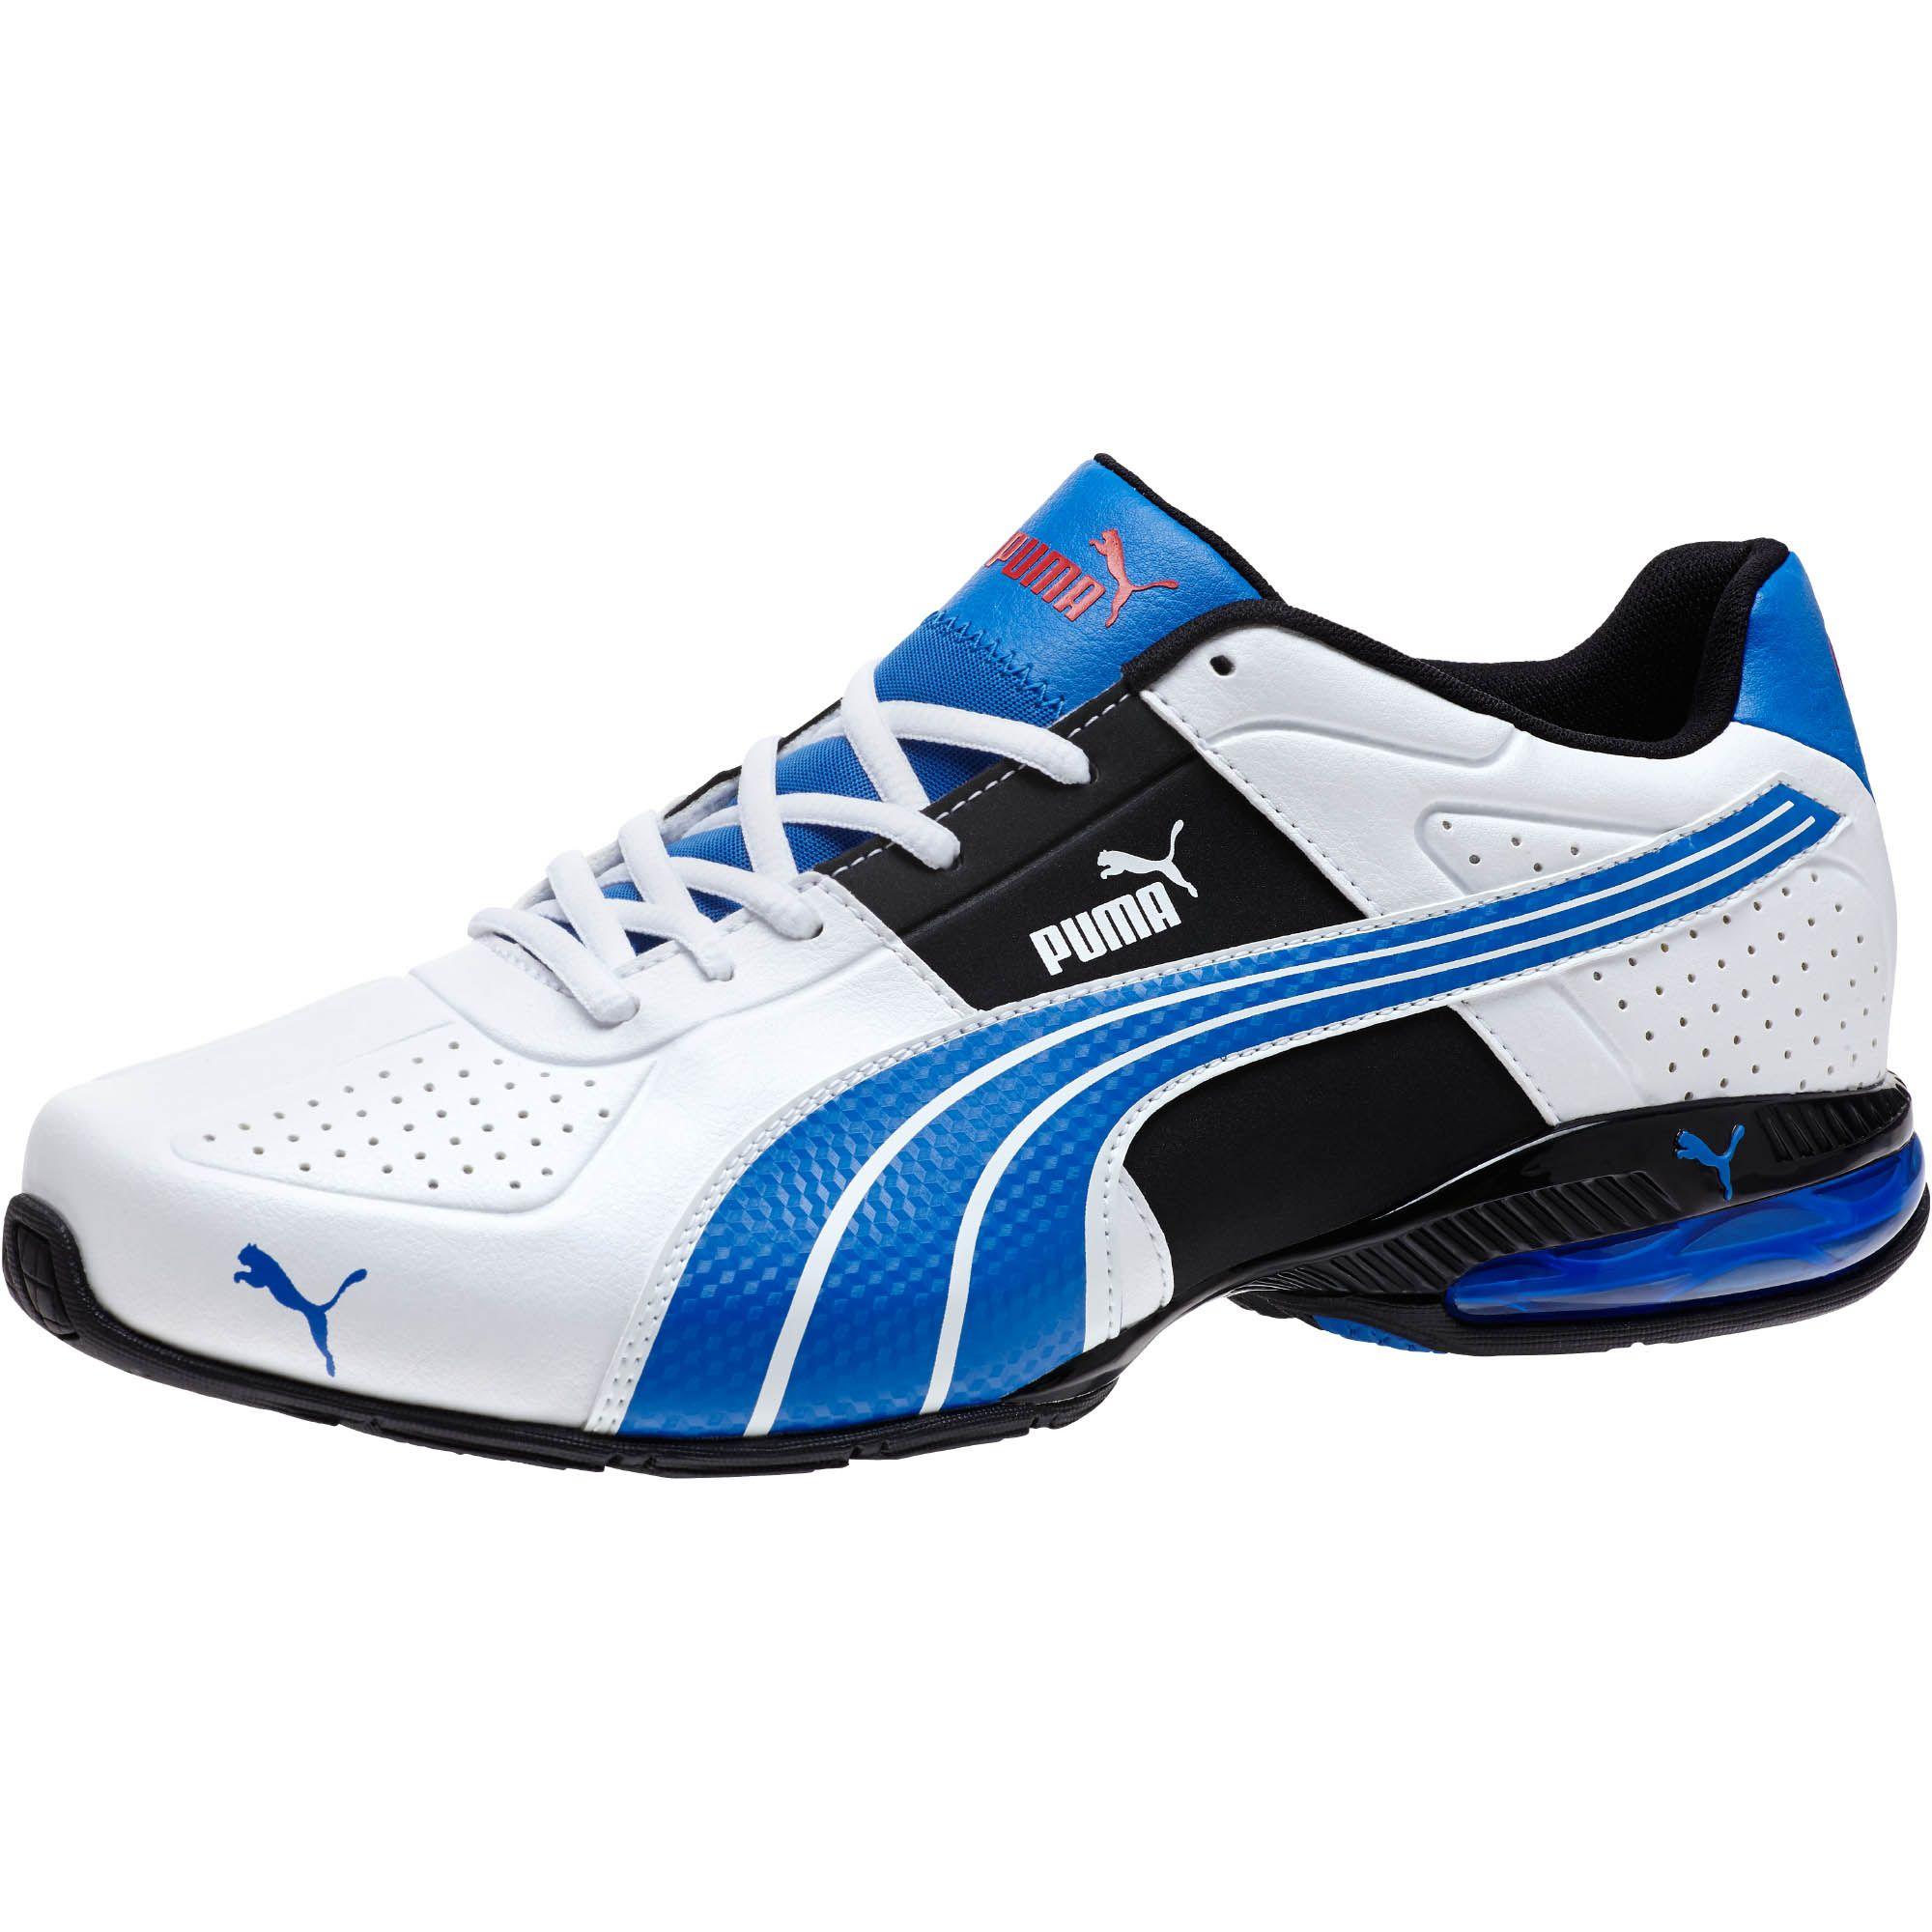 PUMA Rubber Cell Surin Men's Running Shoes in Blue for Men - Lyst